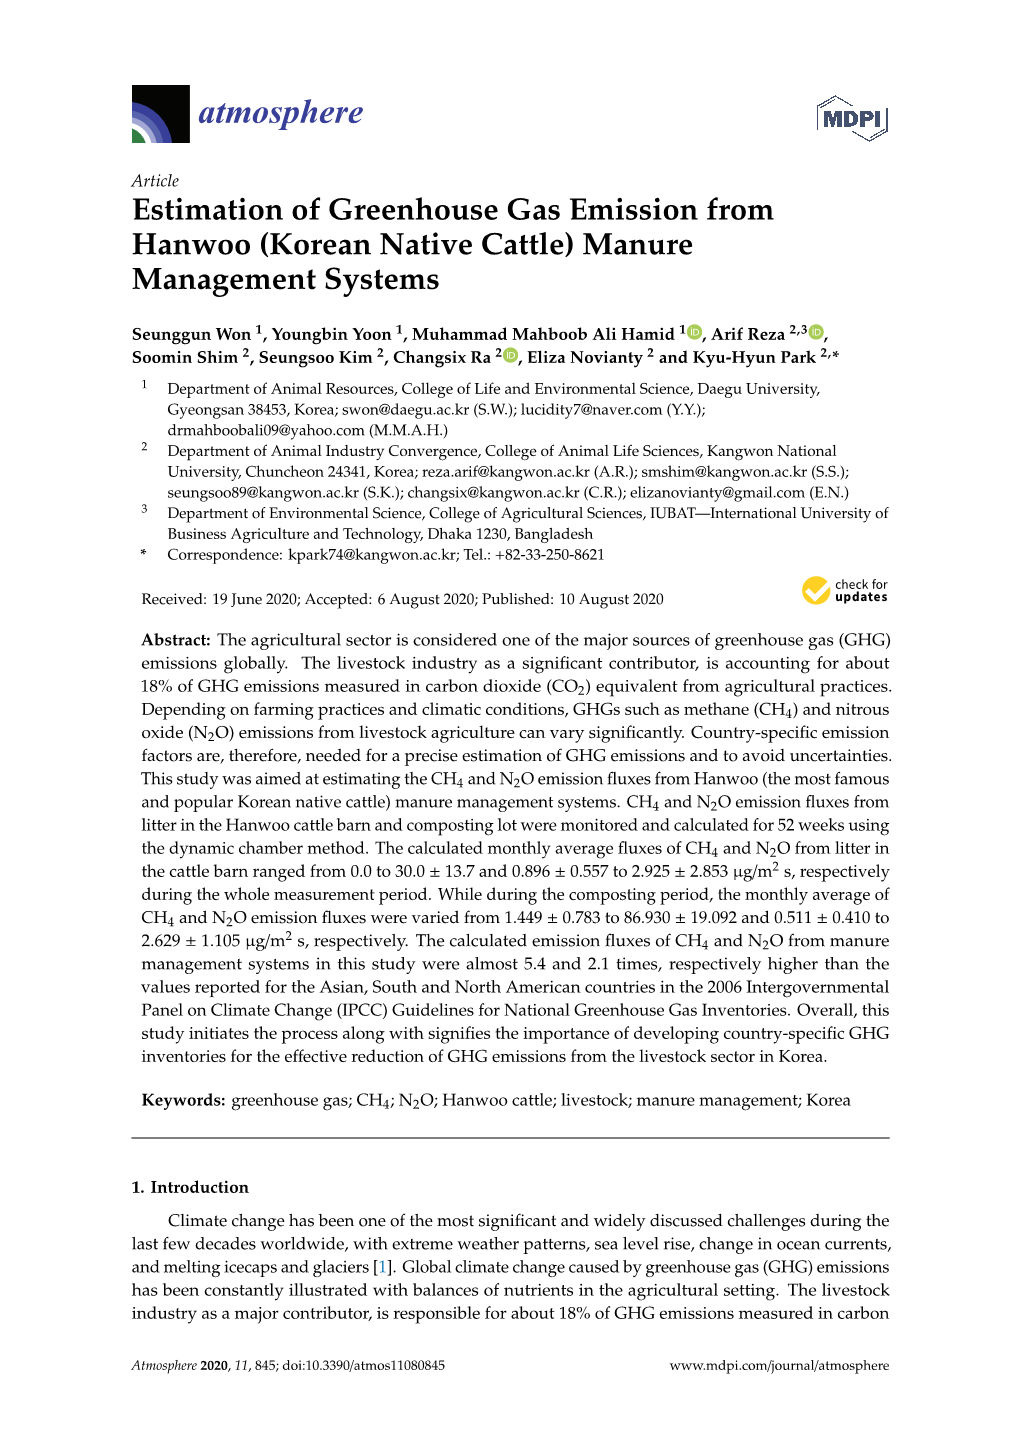 Estimation of Greenhouse Gas Emission from Hanwoo (Korean Native Cattle) Manure Management Systems